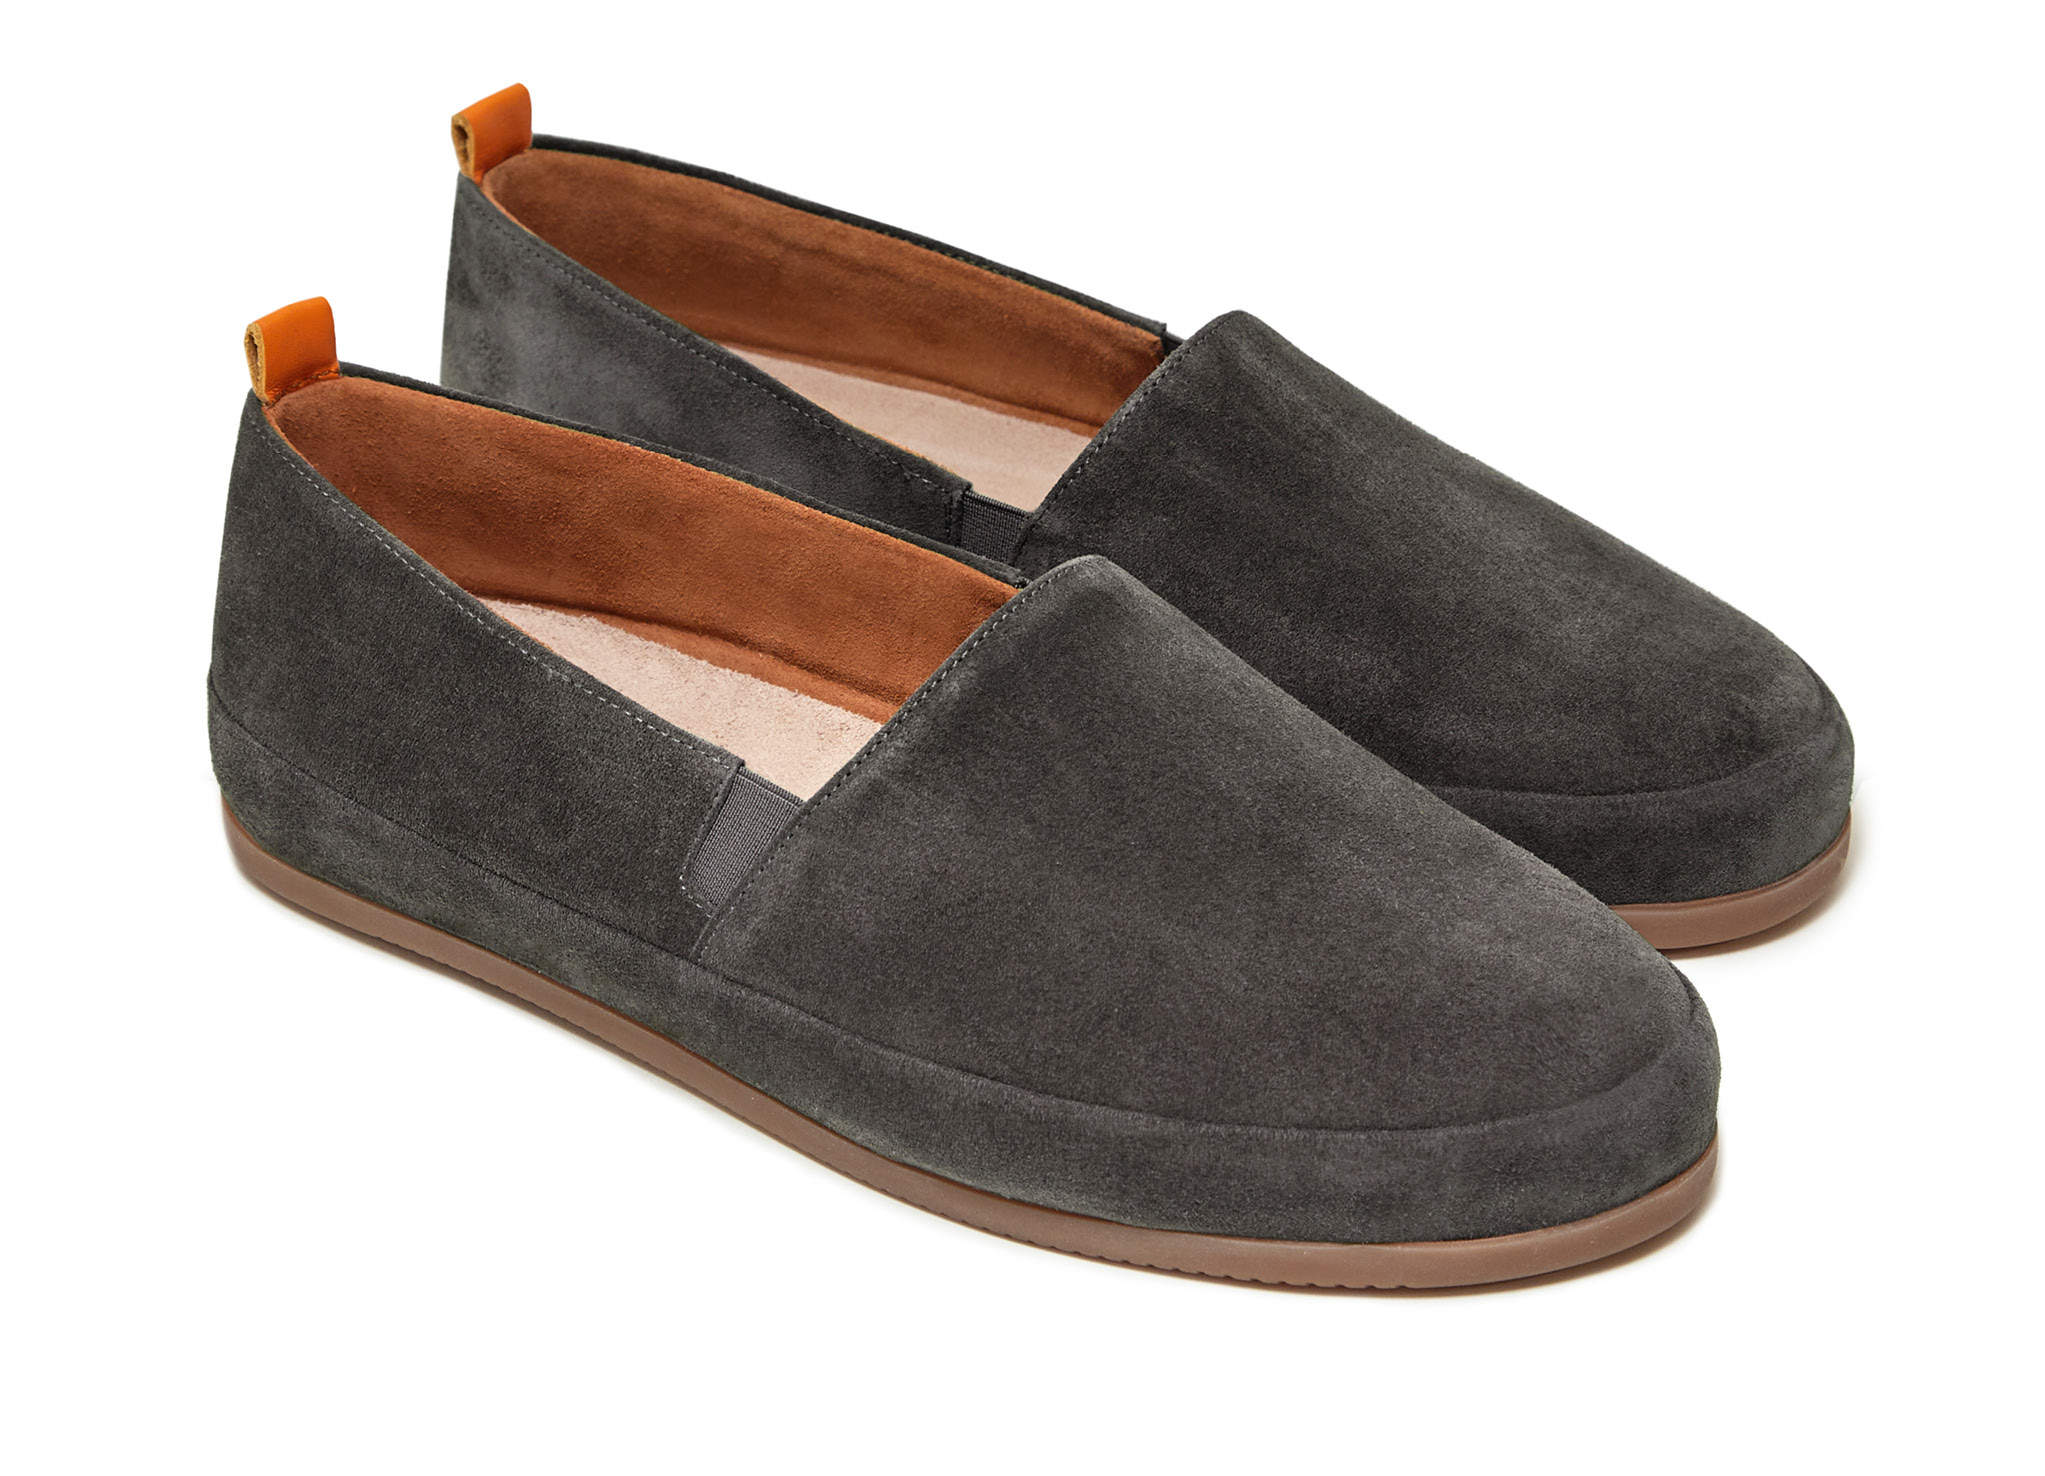 Mens Brown Loafers | MULO shoes | High-quality Italian Suede